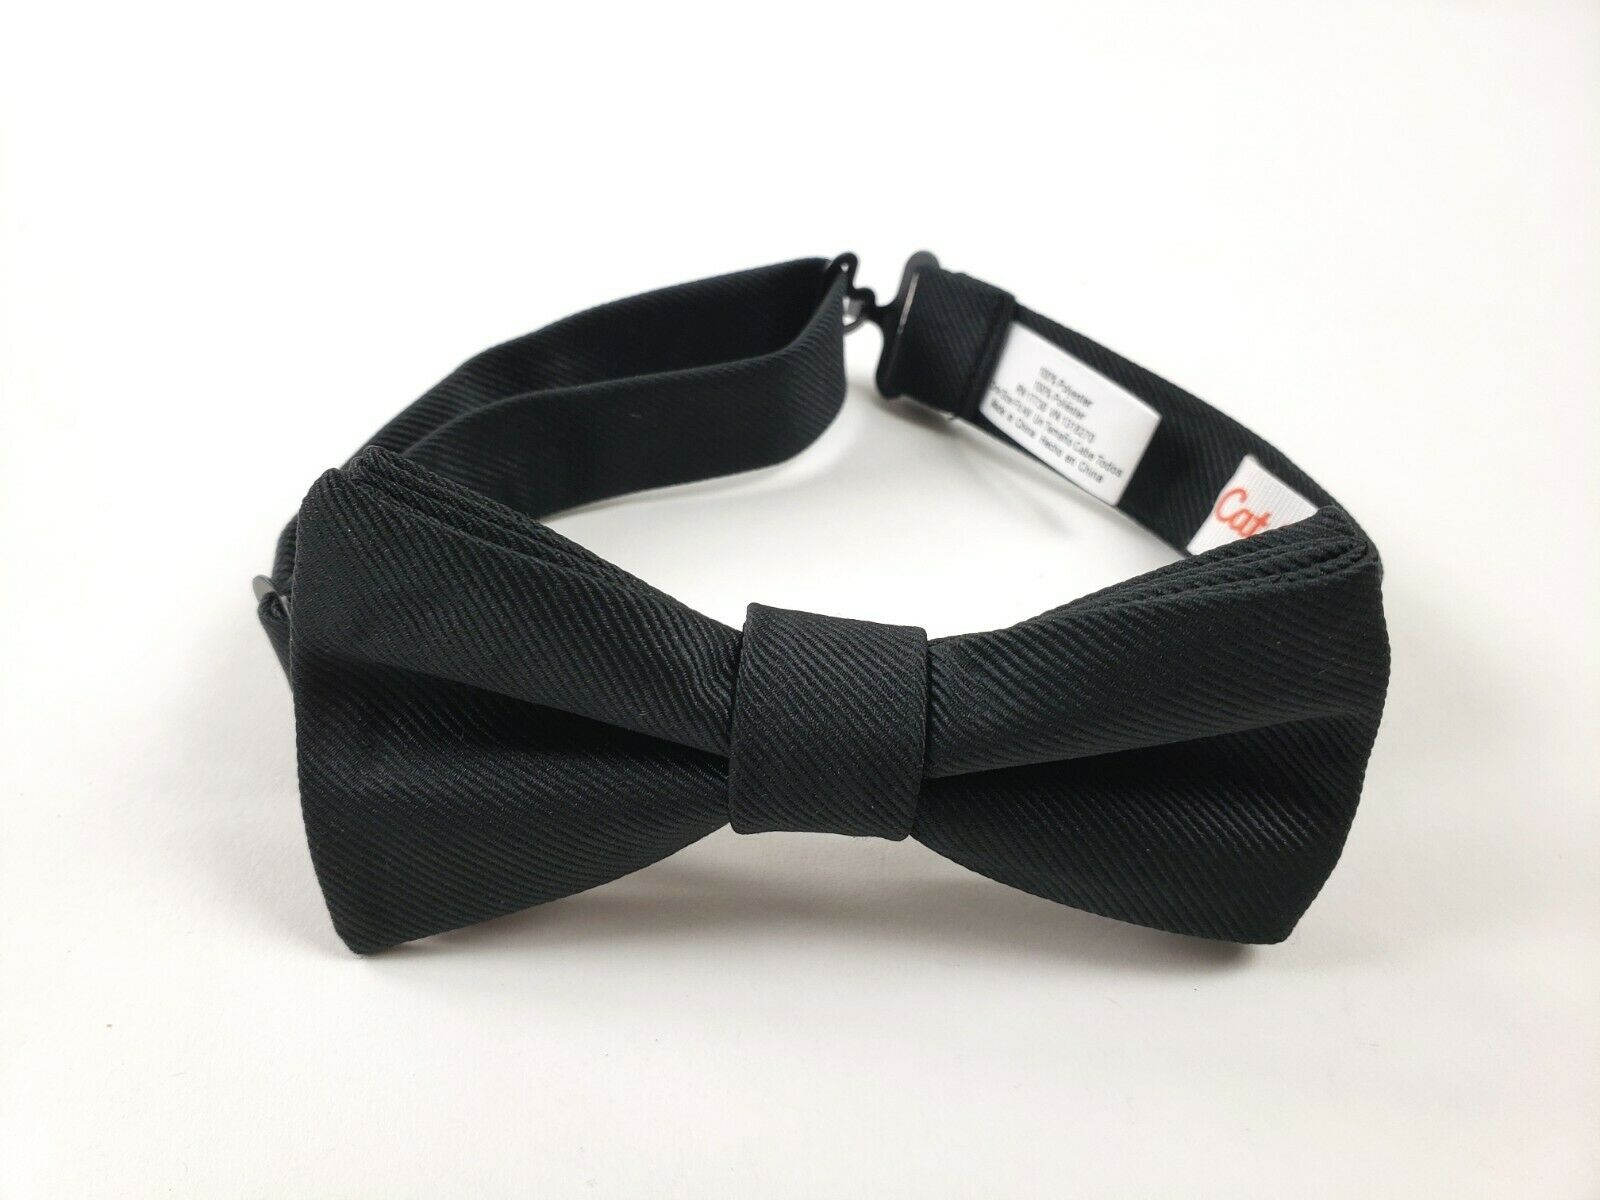 Boys Solid Black Bow Tie Cat & Jack One Size with adjustable strap